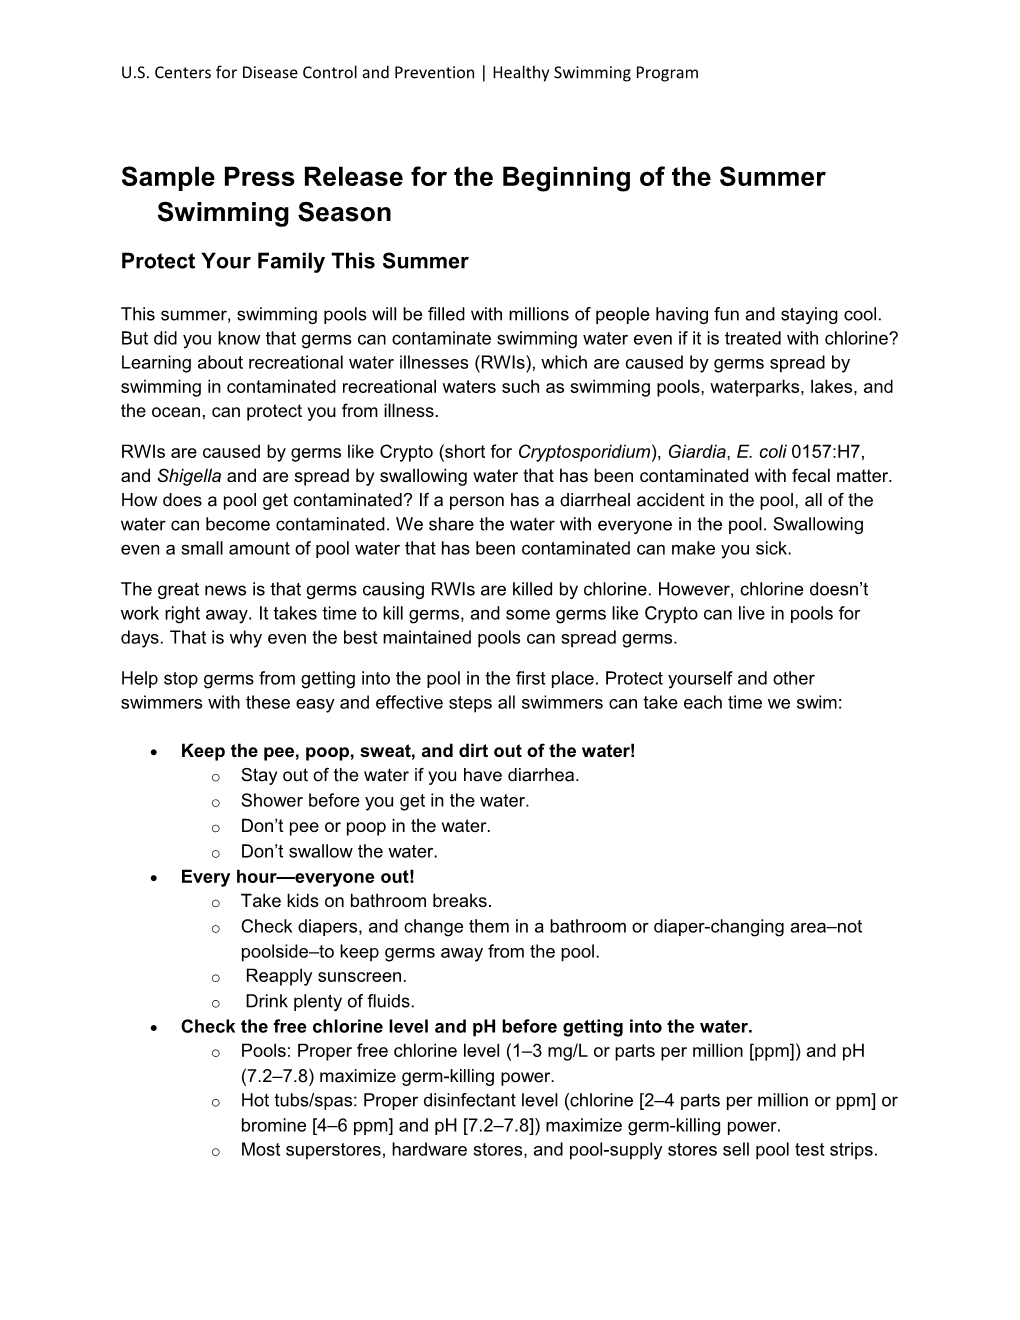 Sample Press Release for the Beginning of the Summer Swimming Season